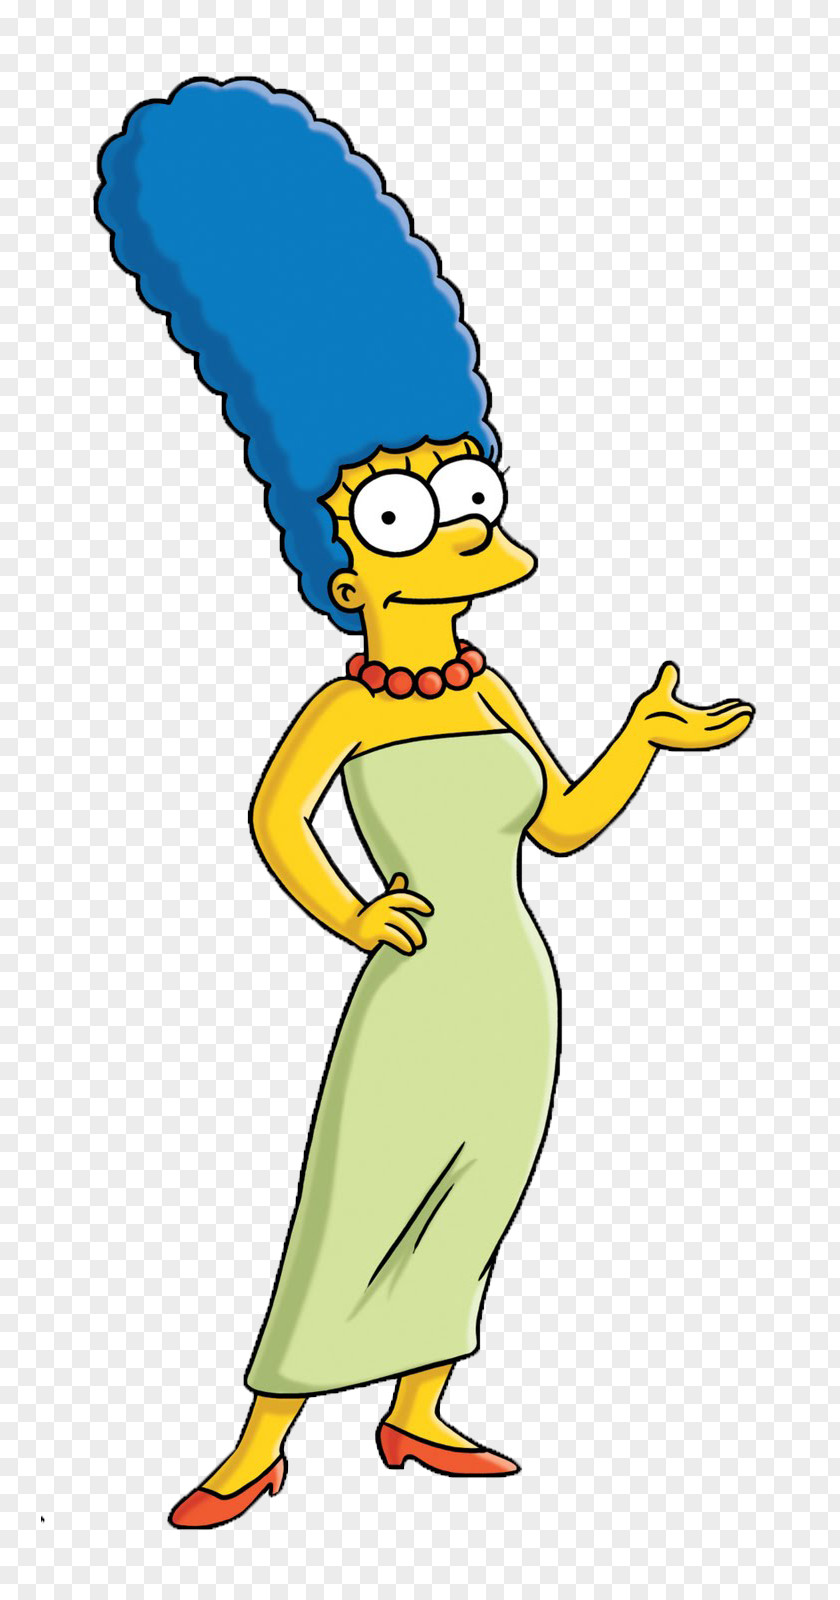 The Simpsons Marge Simpson Homer Lisa Maggie Bart PNG